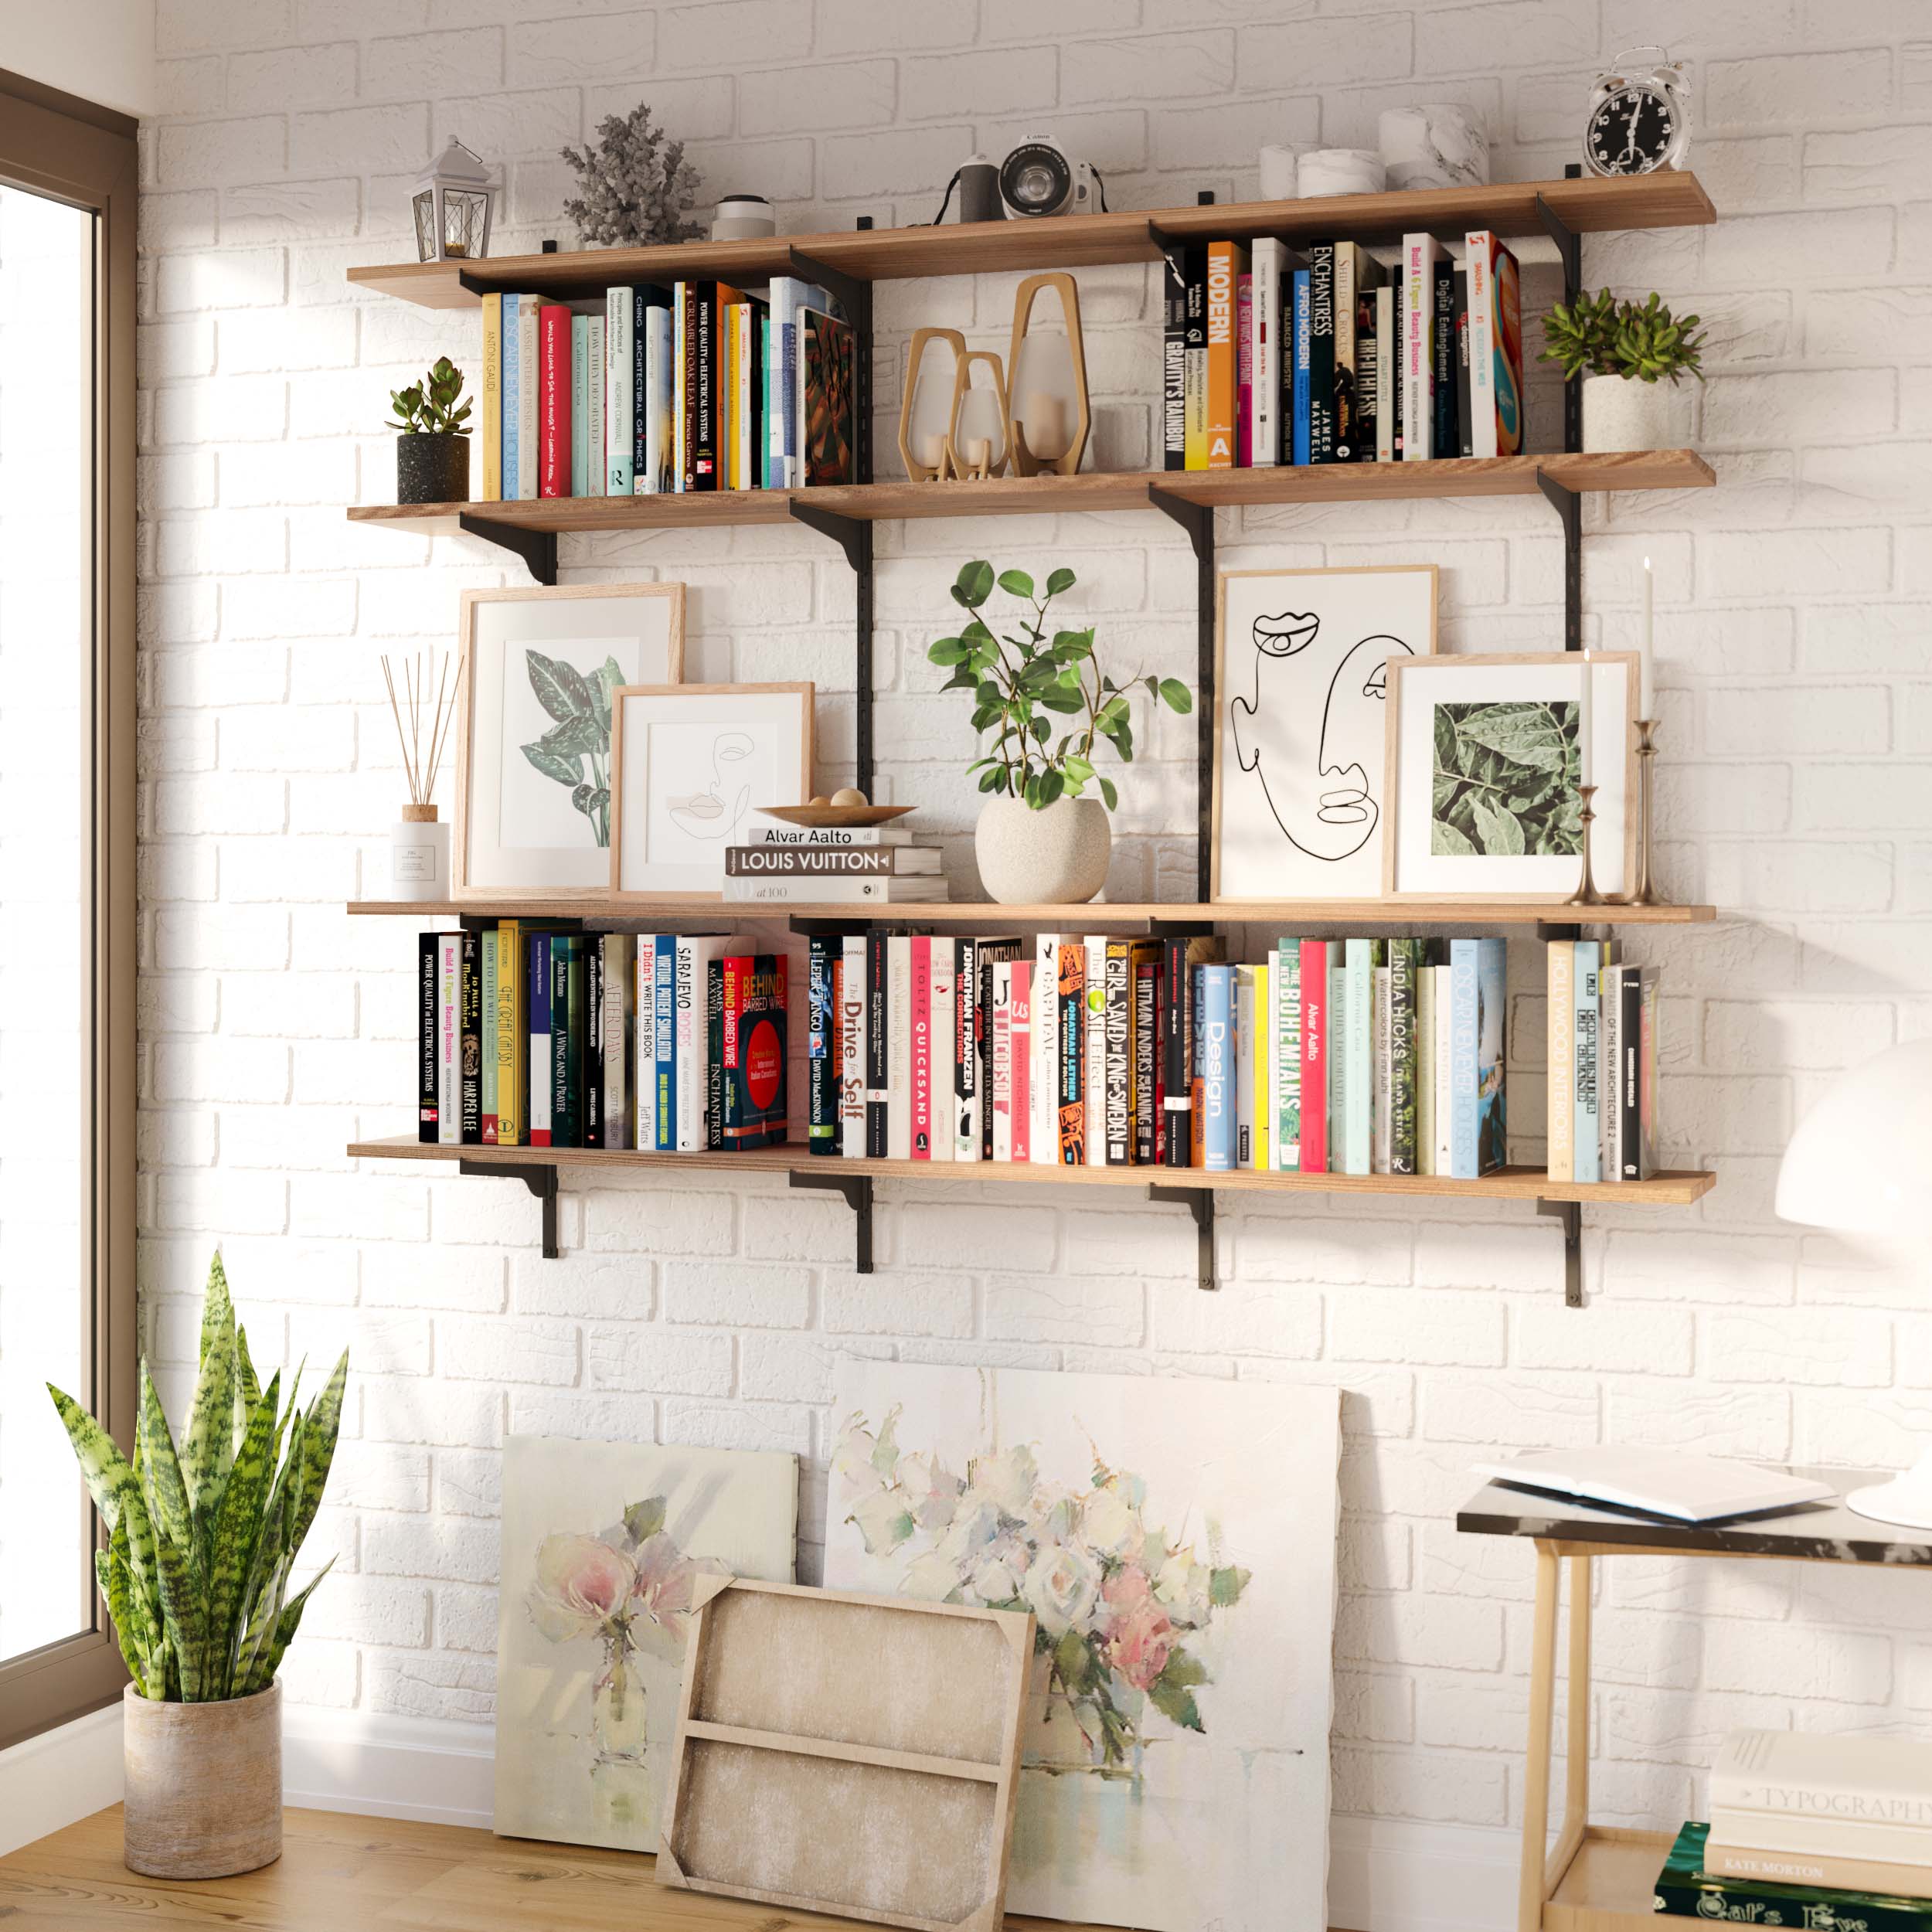  A living room bookshelf filled with books, decorative items, and plants, providing a cozy and personal atmosphere ideal for reading and relaxation.